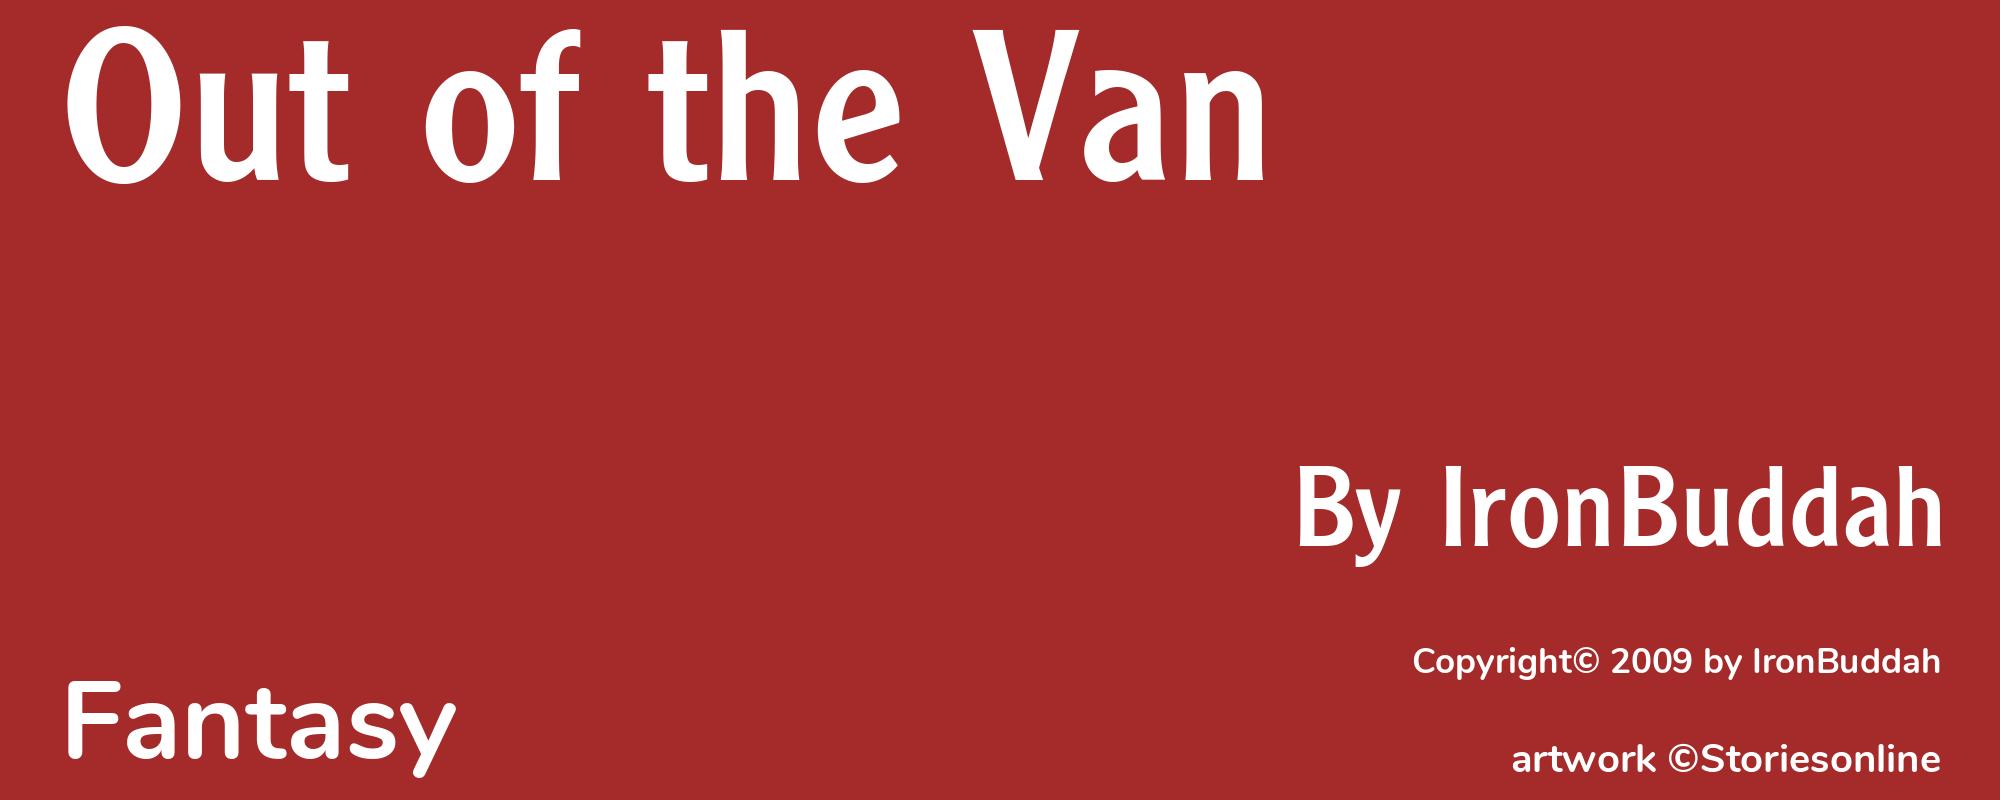 Out of the Van - Cover